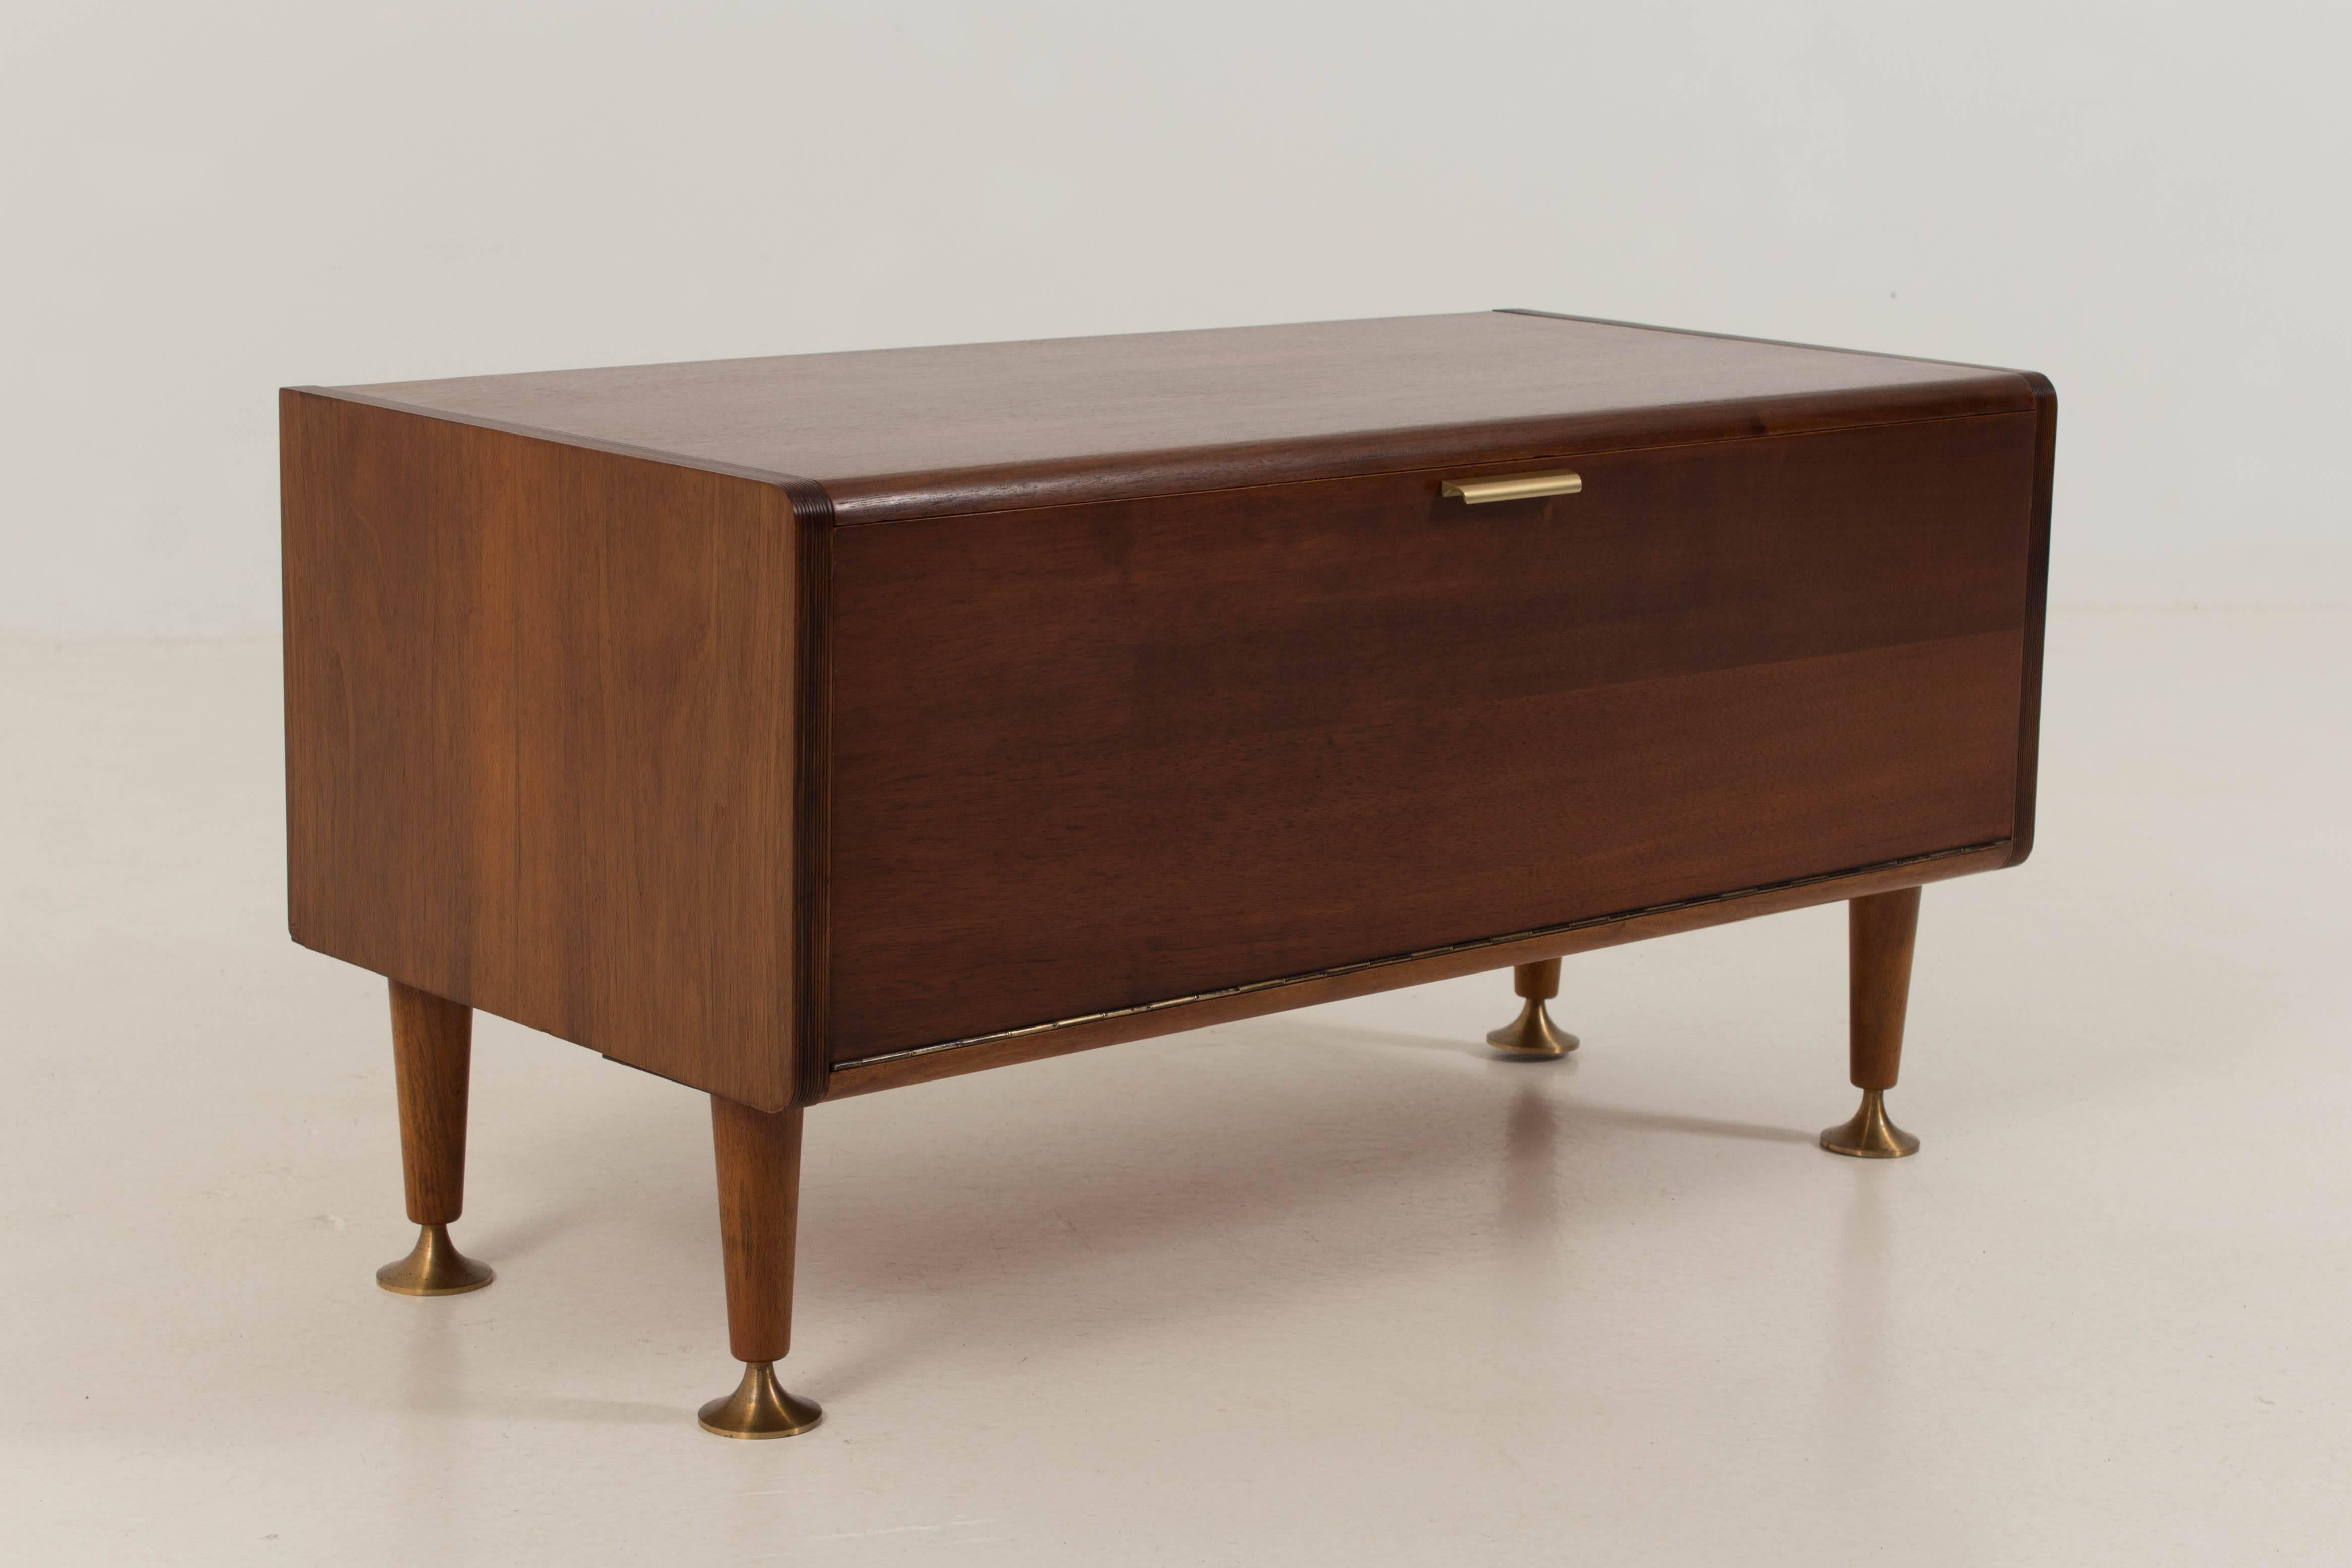 Dutch Stylish Mid-Century Modern Flat Screen Credenza by A.A.Patijn for Poly-Z